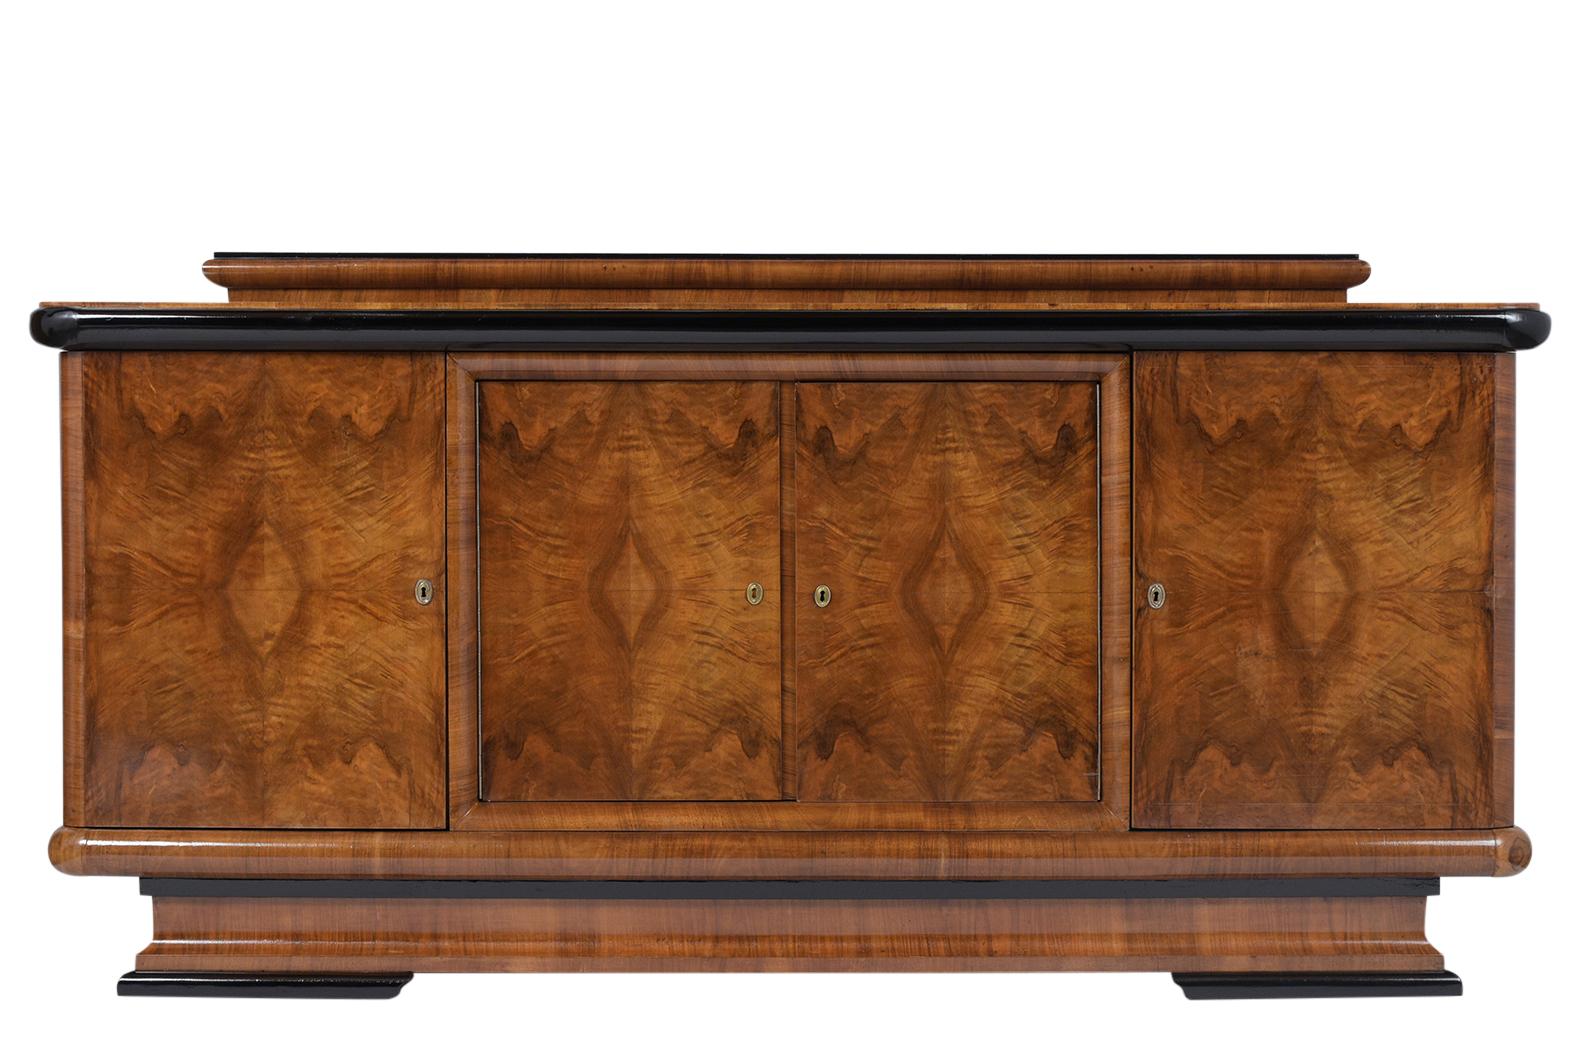 This French Art Deco buffet circa 1940s has been professionally restored, is made out of walnut wood and finished in a light walnut color with ebonized molding accents details with lacquer finished. This Sideboard comes with four doors that are